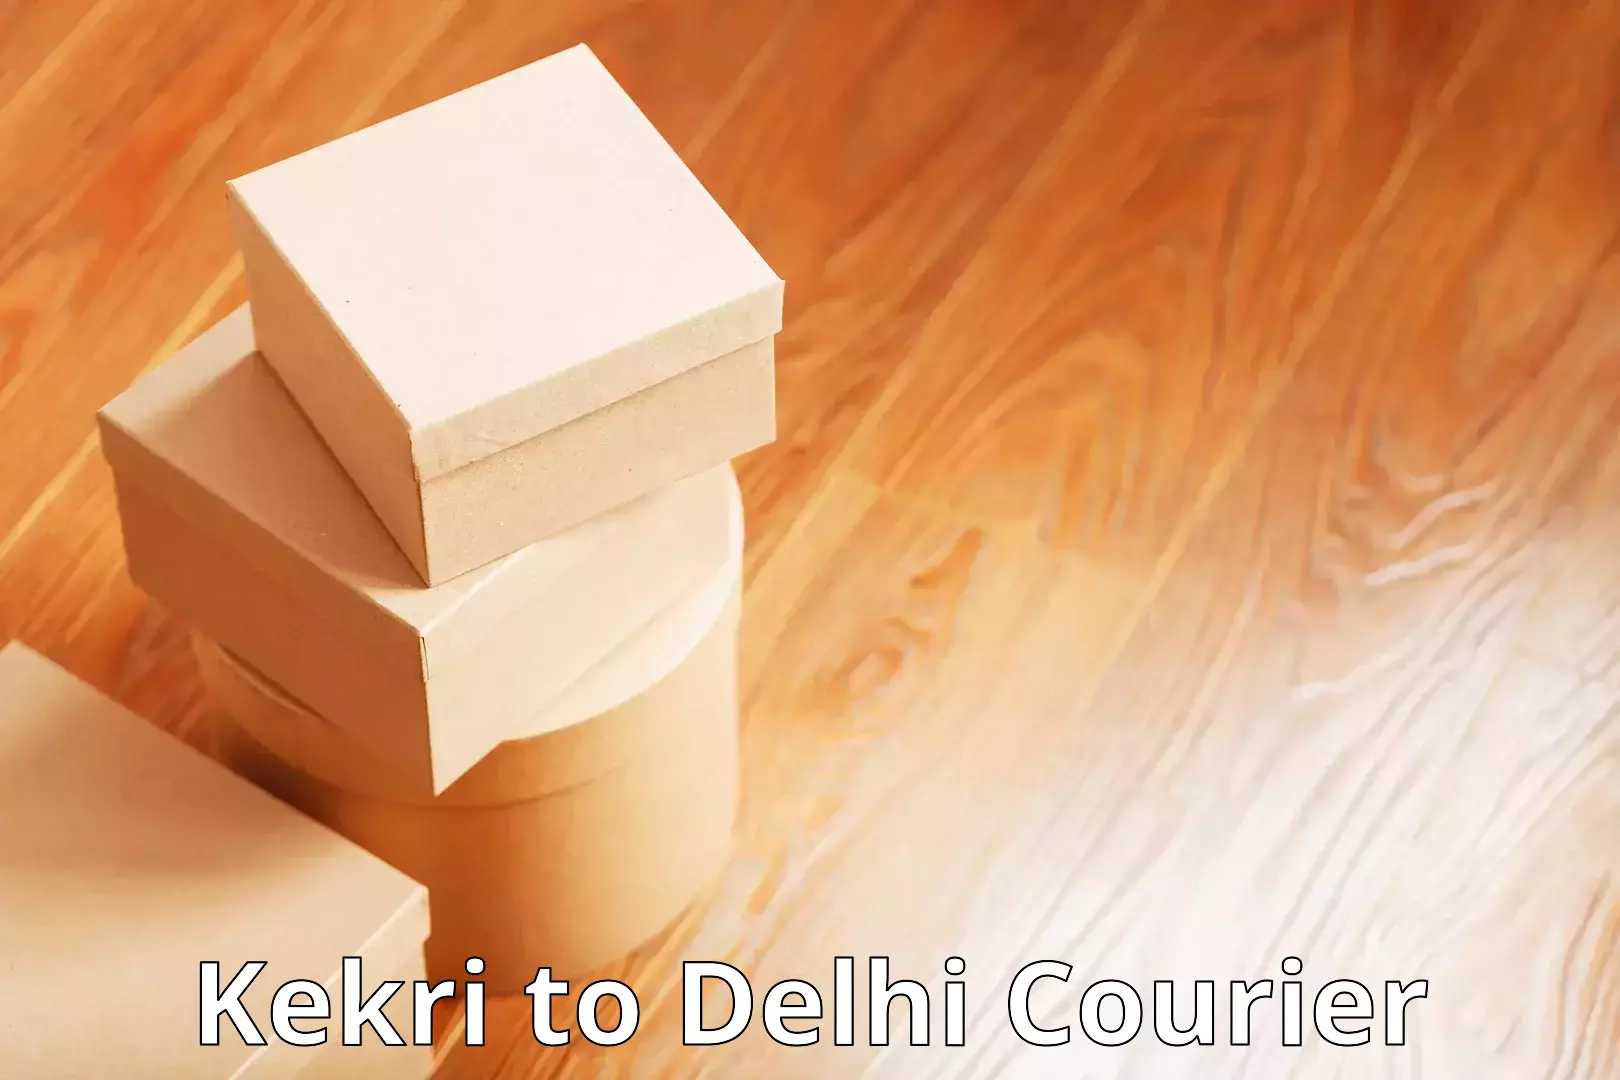 Easy access courier services Kekri to Jawaharlal Nehru University New Delhi